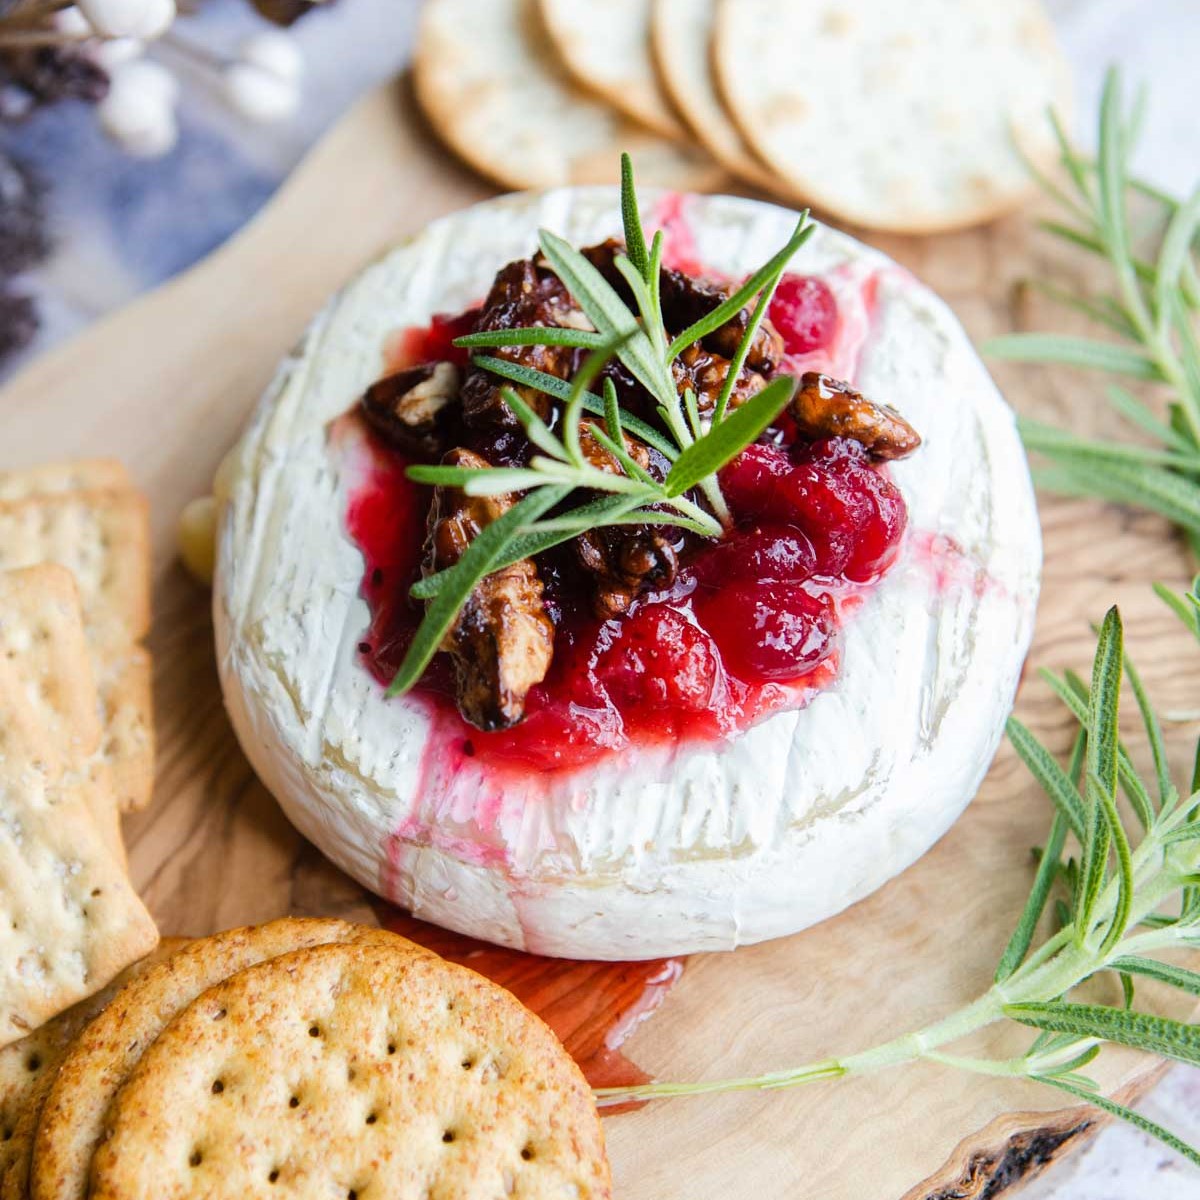 How to bake brie